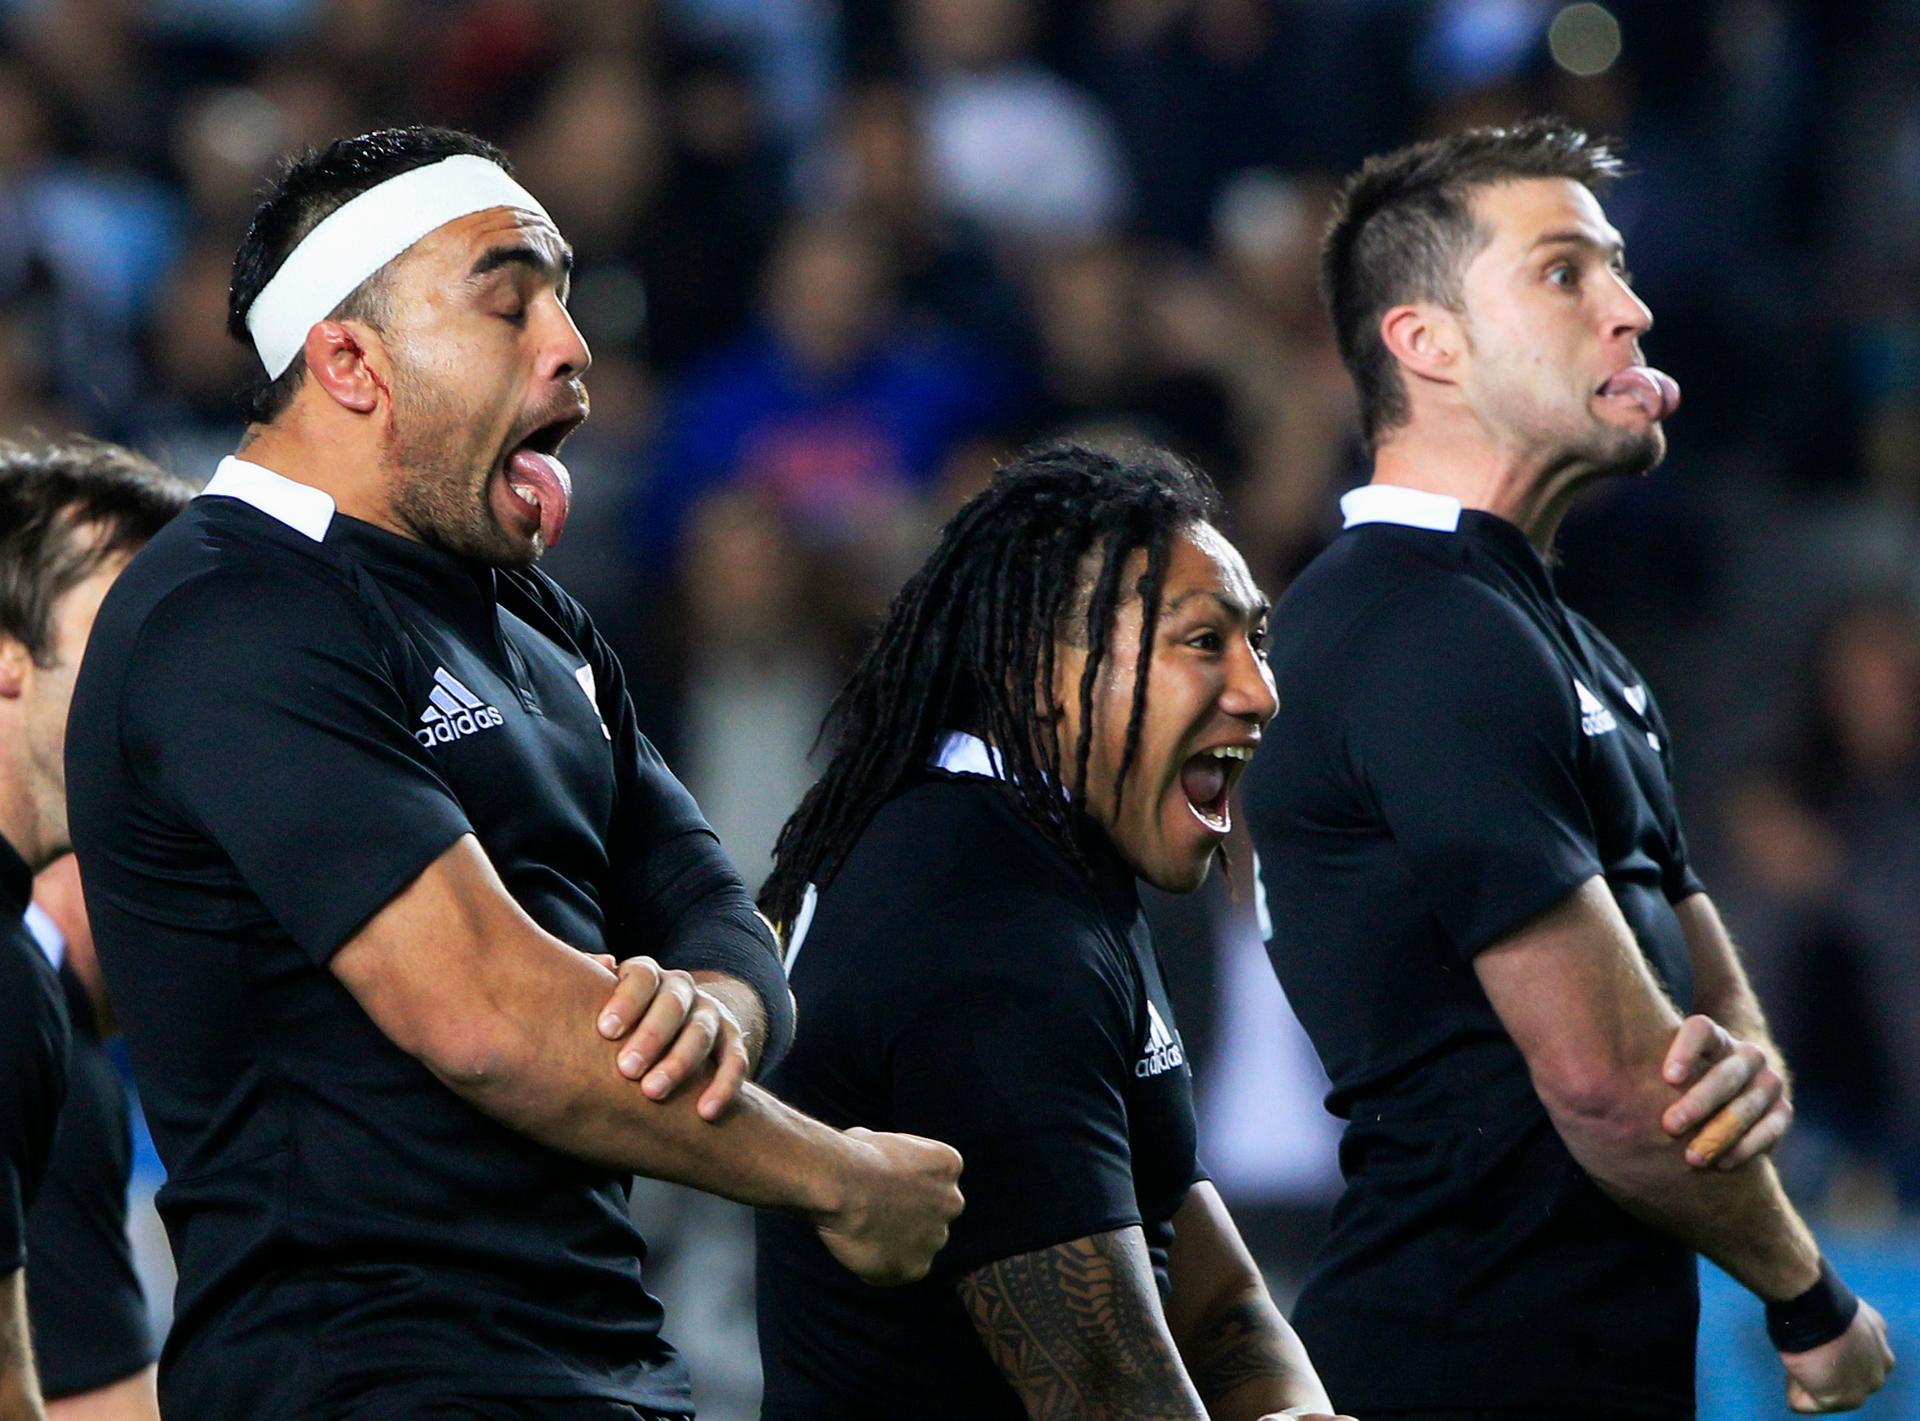 New Zealand All Blacks' (L-R) Liam Messam, Ma'a Nonu and Cory Jane perform a Haka before their Rugby Championship match against Argentina Los Pumas in La Plata September 29, 2012.